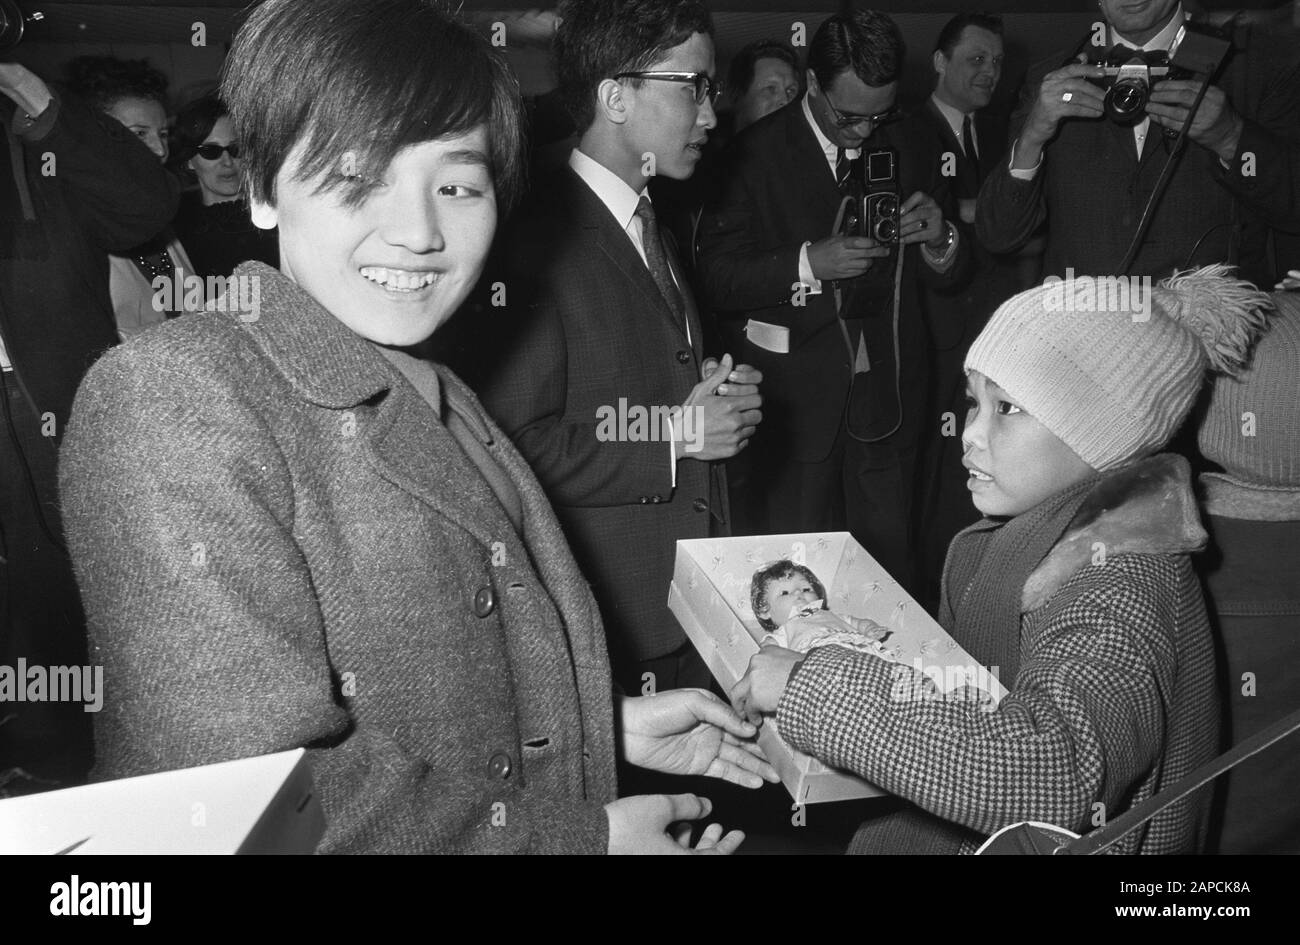 Arrival Vietnamese children at Schiphol. Troug Phai Anh Dao gives Le Thi Trai a doll upon arrival Date: 20 December 1967 Location: Noord-Holland, Schiphol Keywords: Children, arrivals Stock Photo